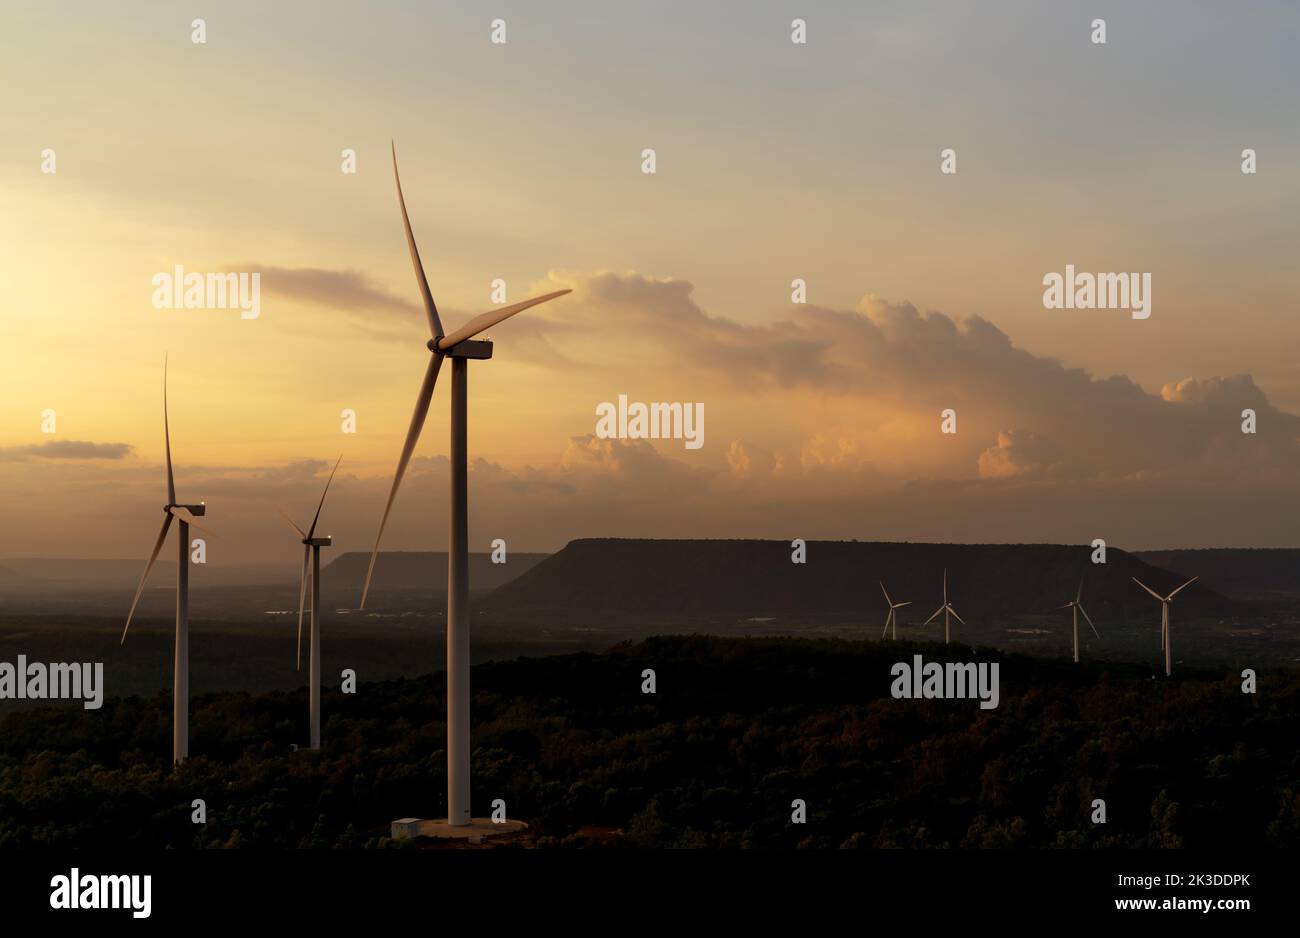 Wind energy. Wind power. Sustainable, renewable energy. Wind turbines generate electricity. Windmill farm on mountain with sunset sky. Green energy Stock Photo